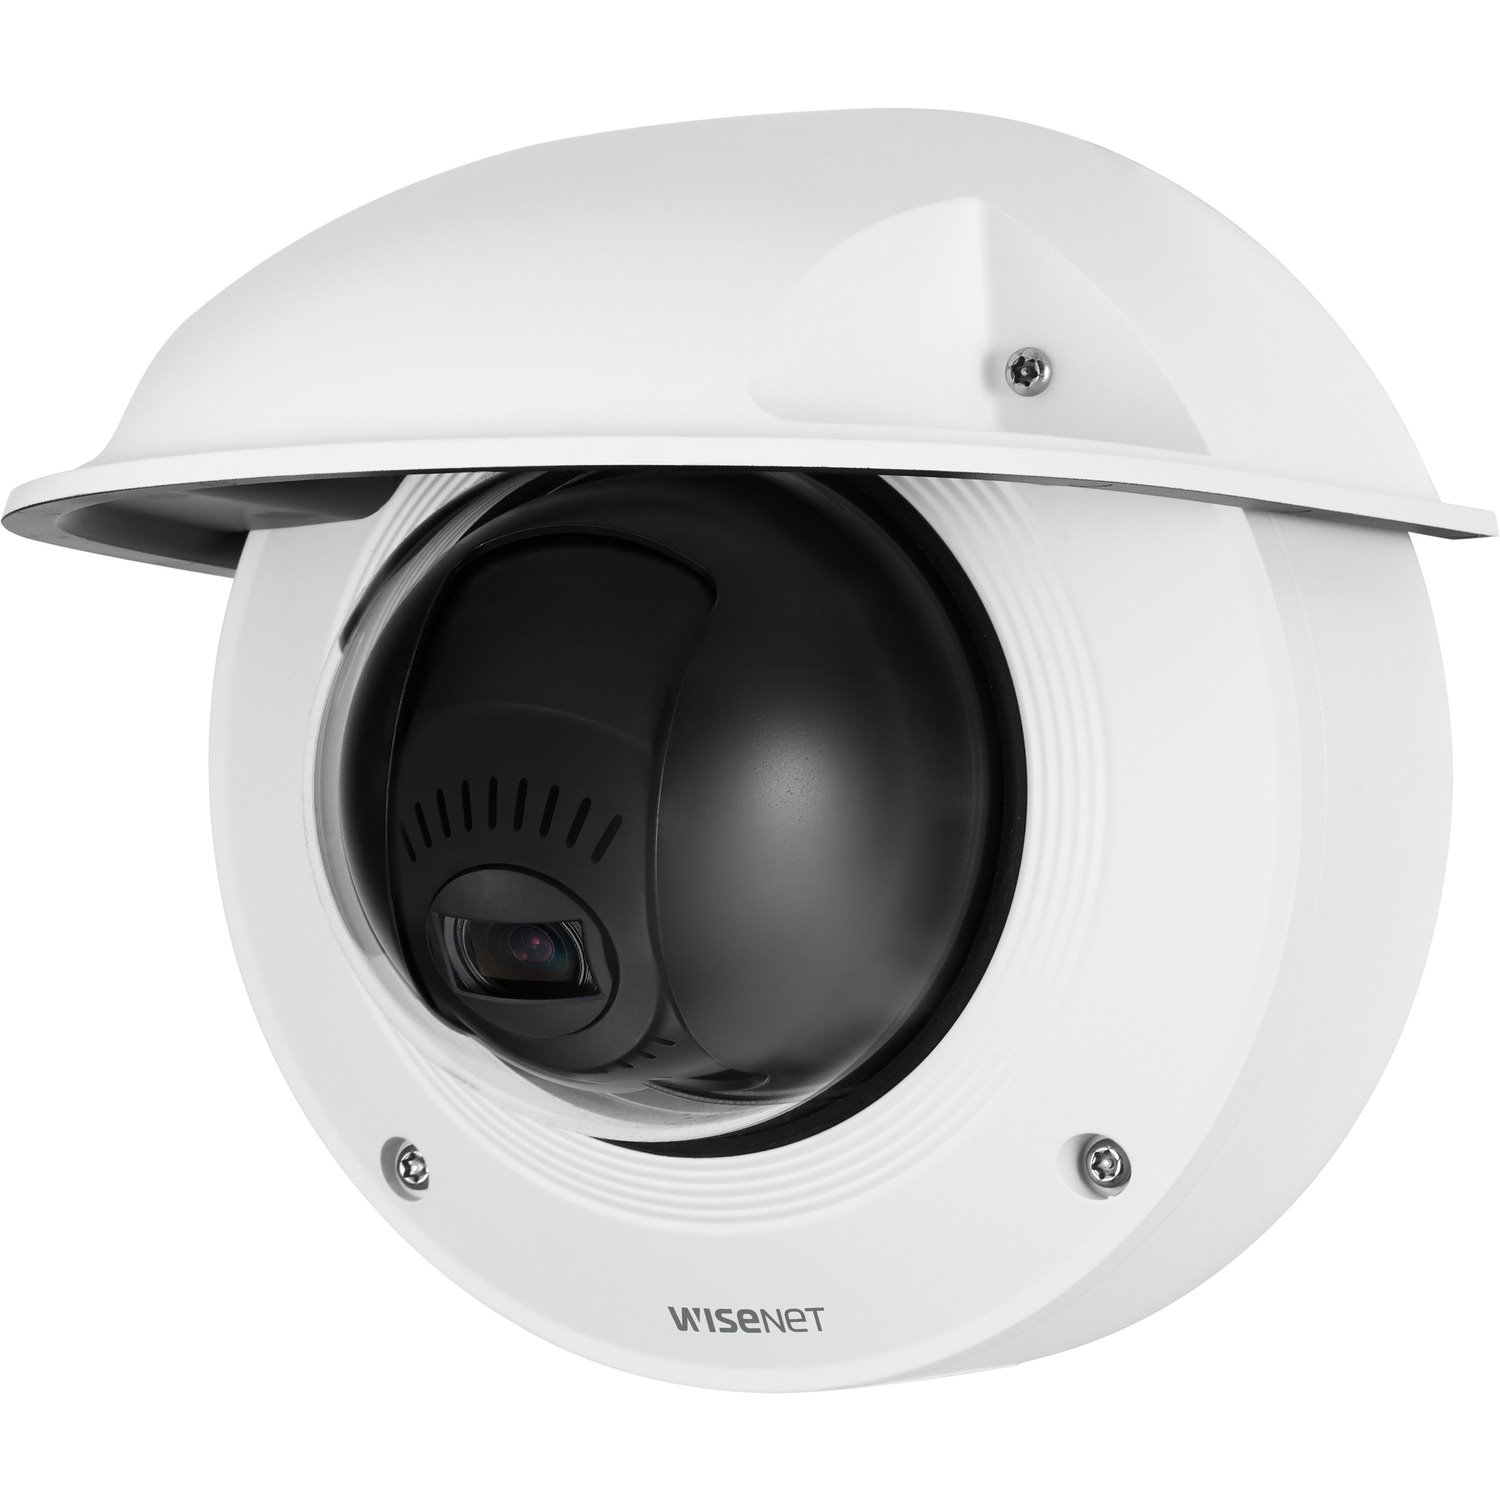 Wisenet XNV-6081Z 2 Megapixel Outdoor Full HD Network Camera - Color, Monochrome - Dome - White